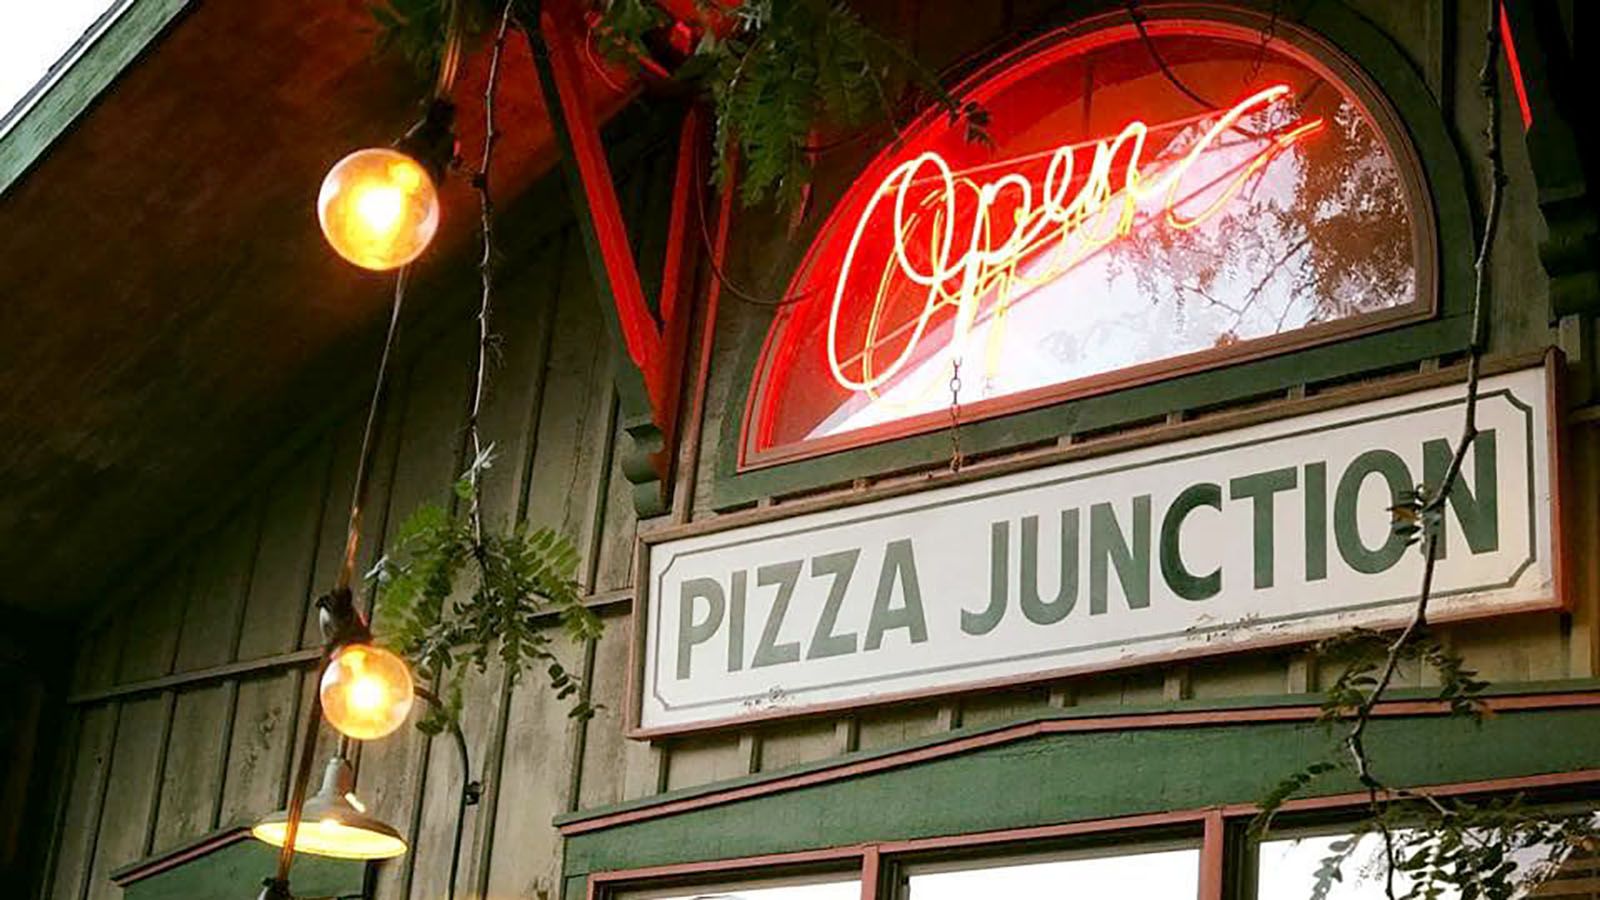 Facebook posts make it appear that Pizza Junction Cafe in Huntington is close to reopening.